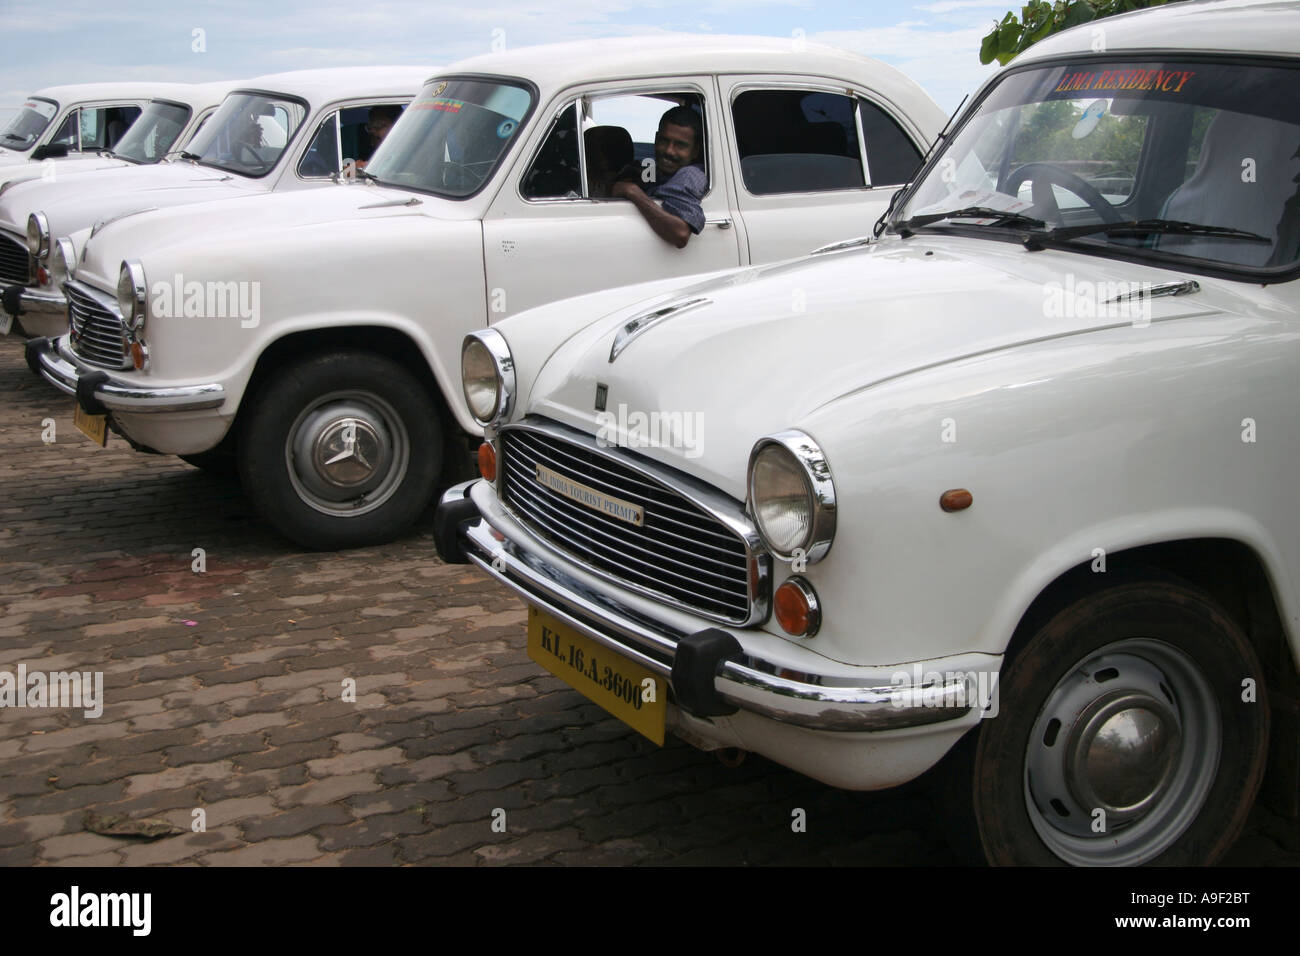 White Ambassador taxi cars line up waiting for fares in Varkala, Kerala, South India Stock Photo